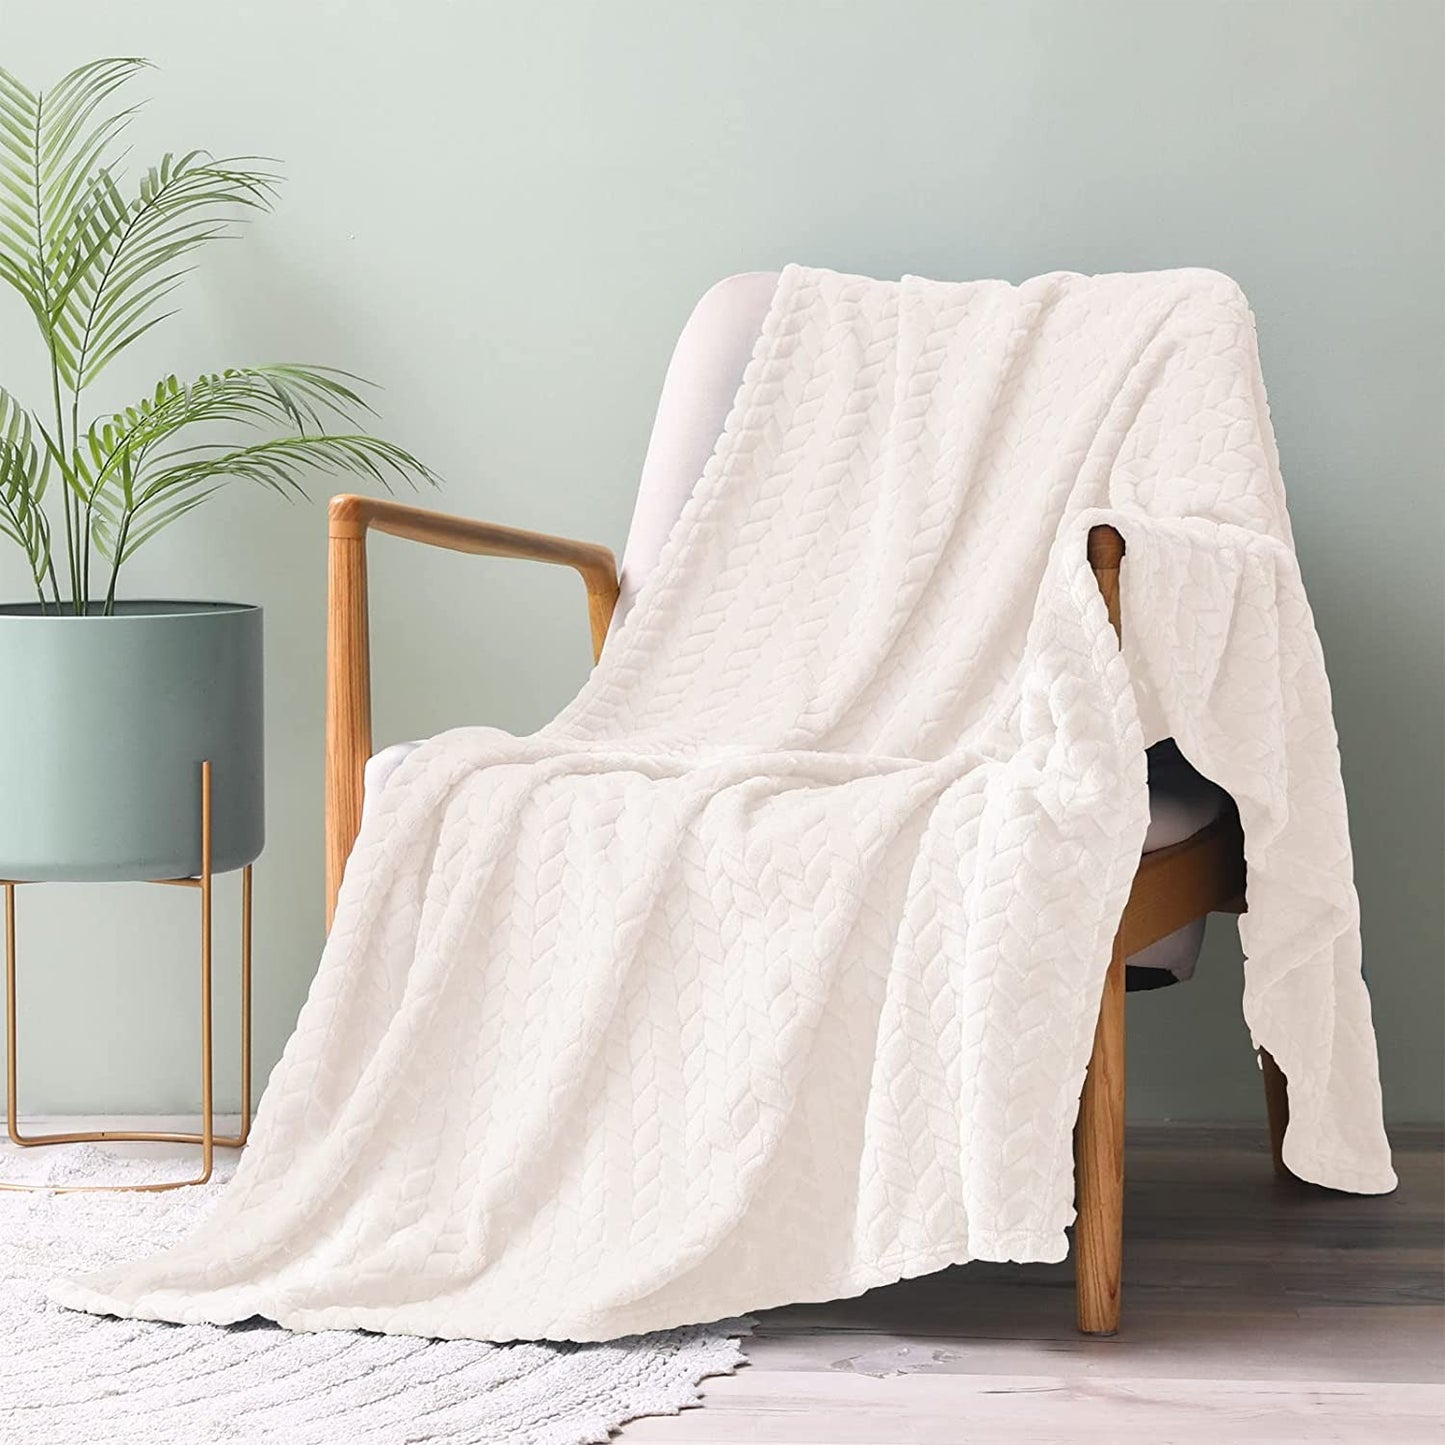 Exclusivo Mezcla Extra Large Flannel Fleece Throw Blanket, 50x70 Inches Leaves Pattern Soft Throw Blanket for Couch, Cozy, Warm, and Lightweight Blanket for Winter, Off White Blanket